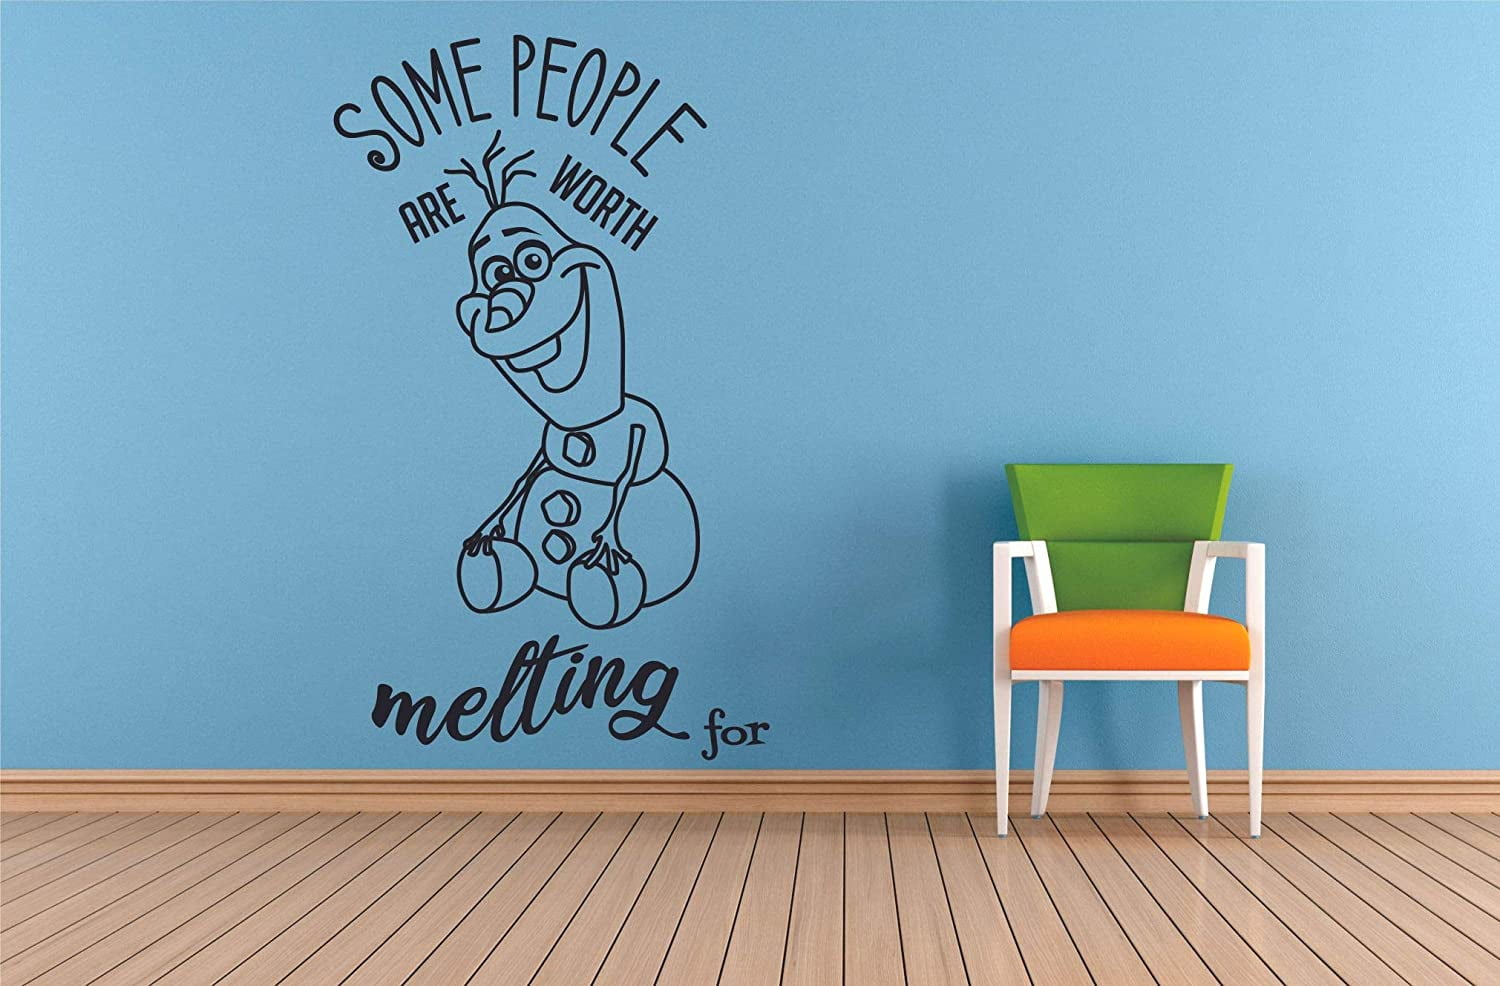 Kids Room Wall Art Decal Sticker Olaf Frozen Quote Disney Worth Melting For 